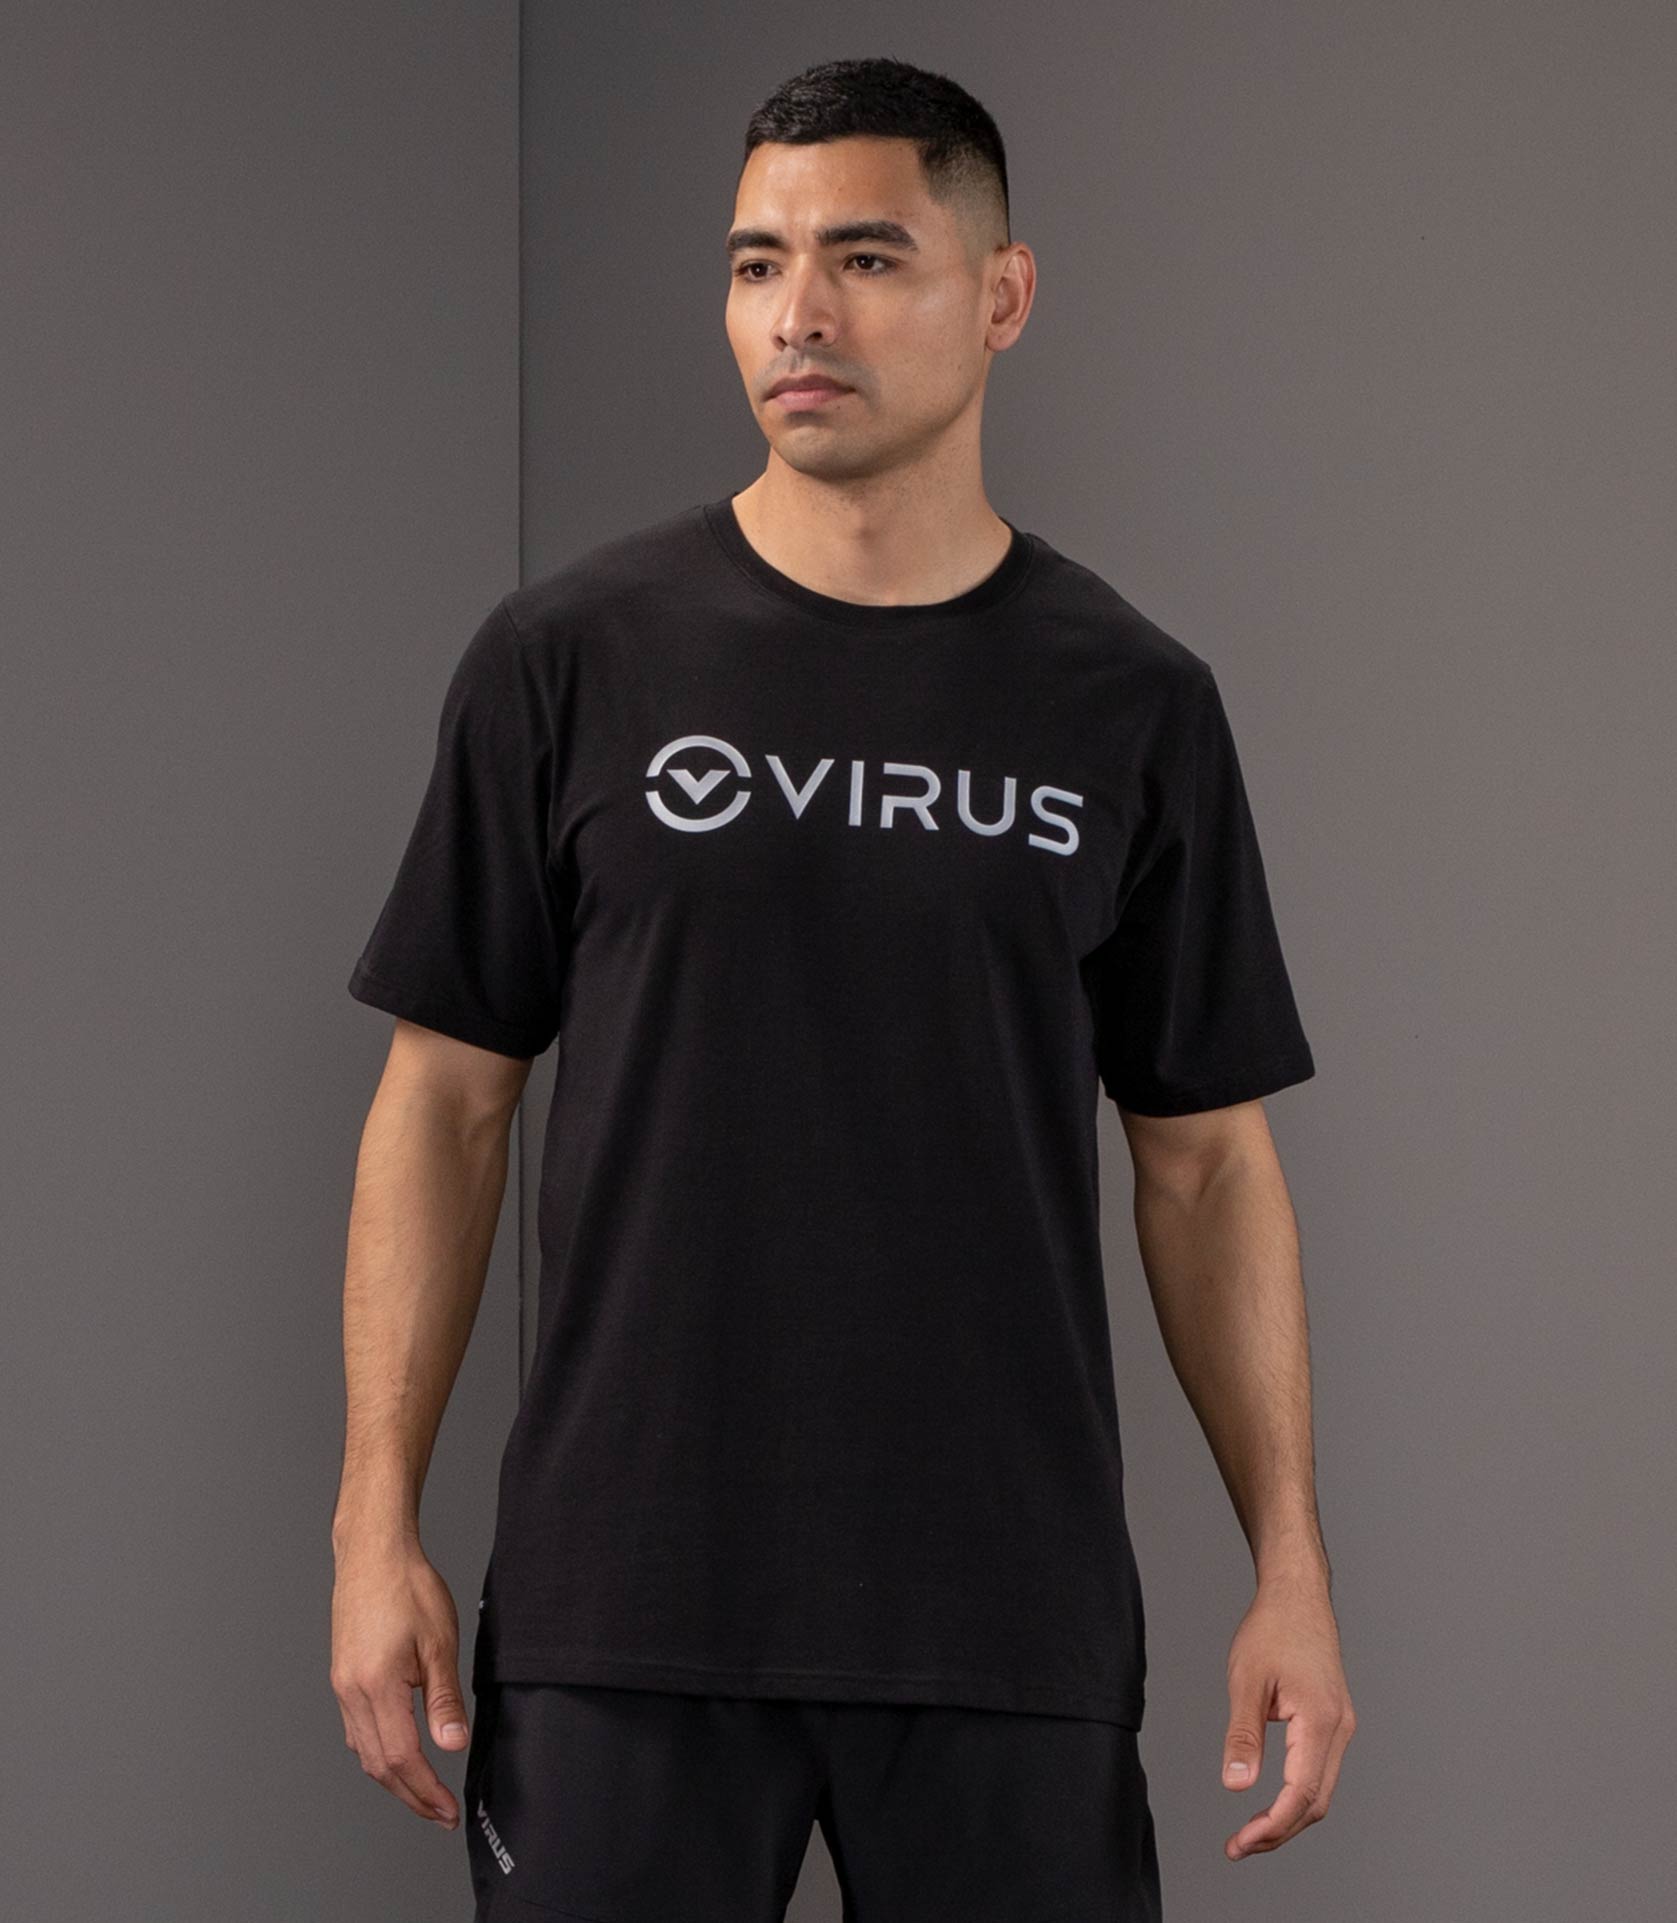 VIRUS INTL: Best Brand? and Why? : r/weightlifting